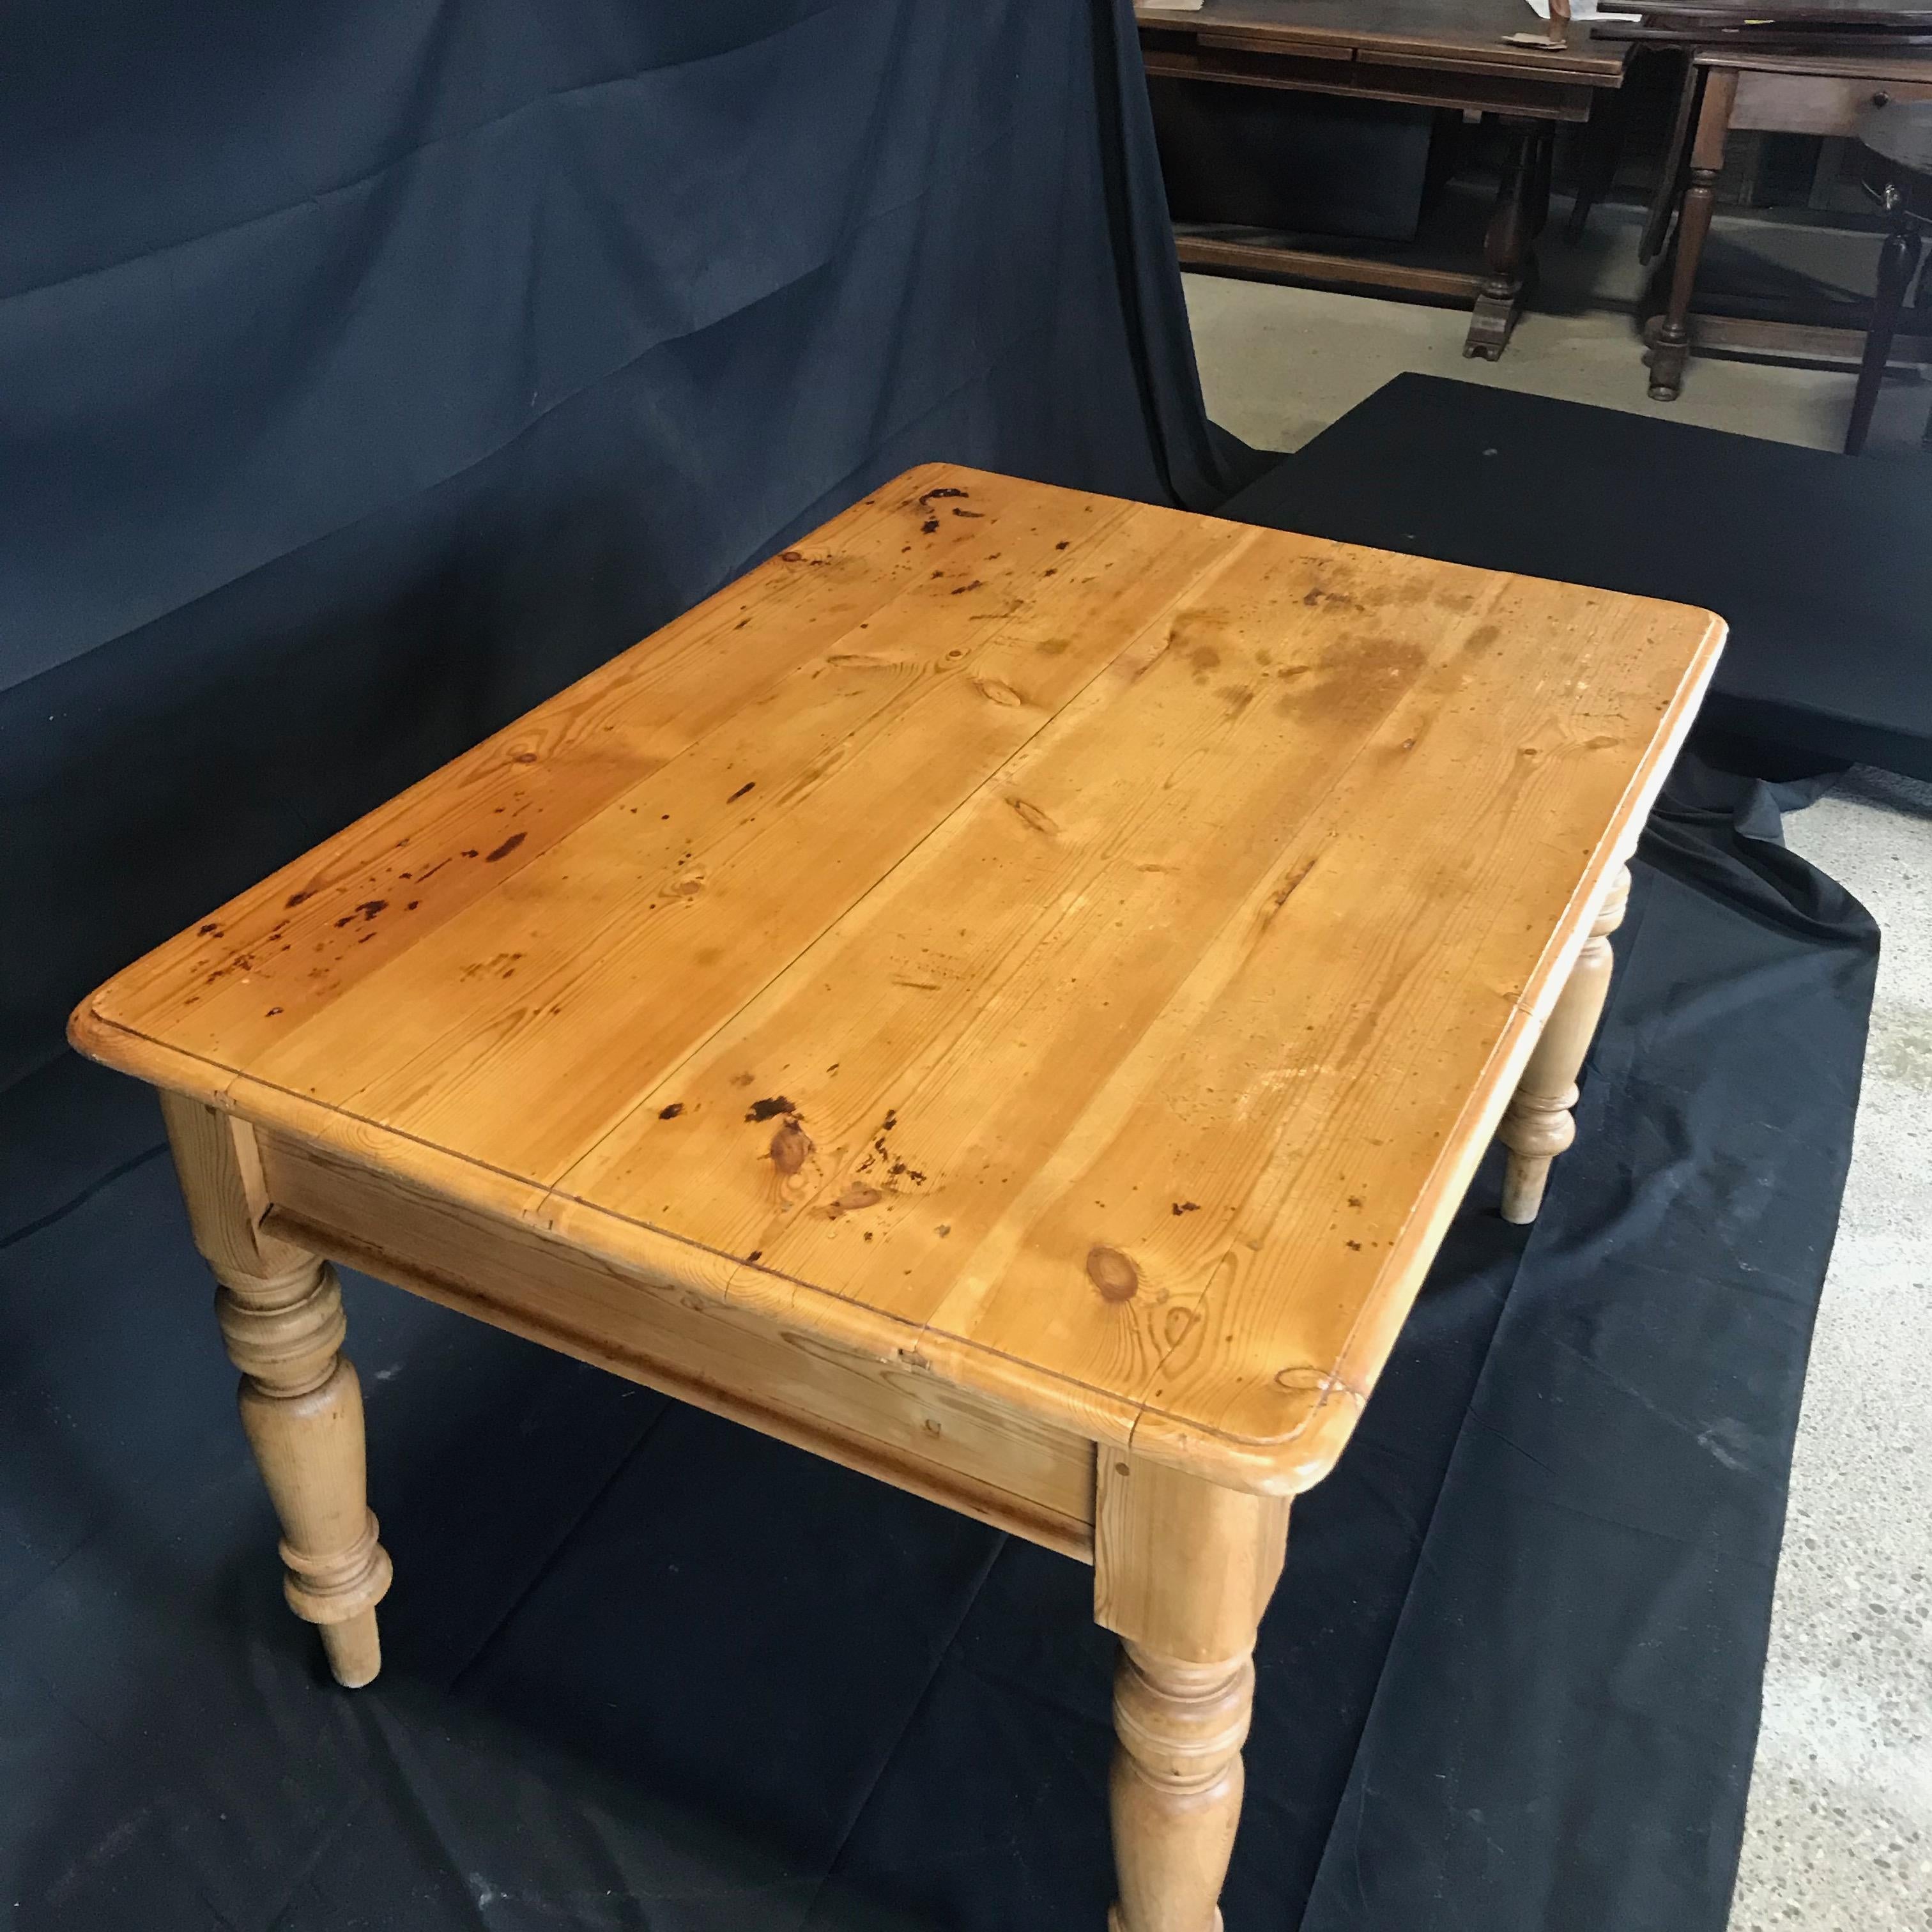 19th Century Charming Irish Scrubbed Pine Antique Dining Table or Desk